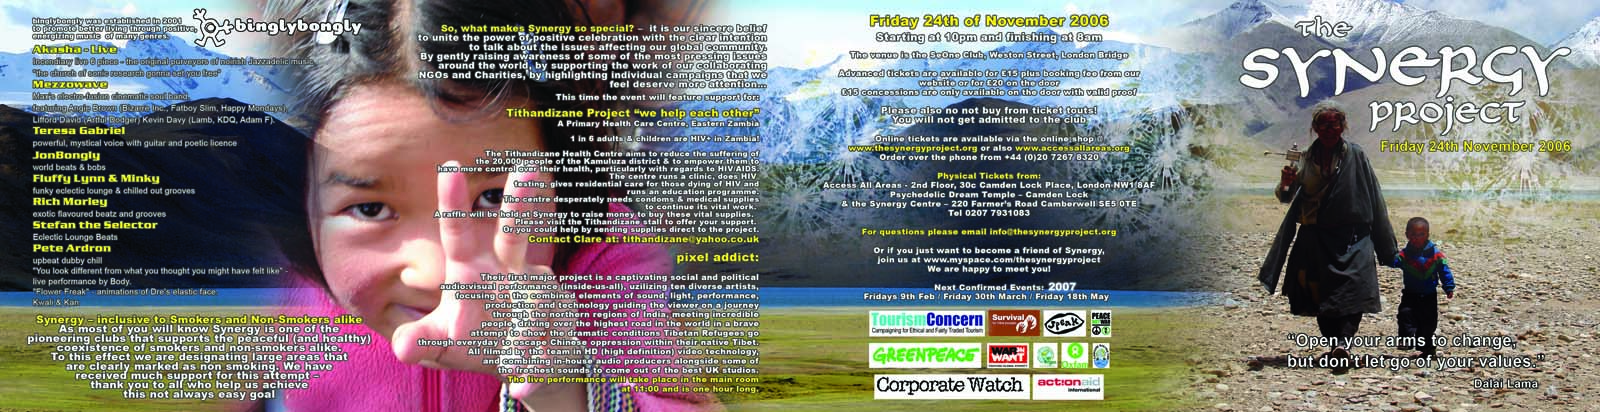 Synergy Project #18 - 24 November 2006 - full flyer front